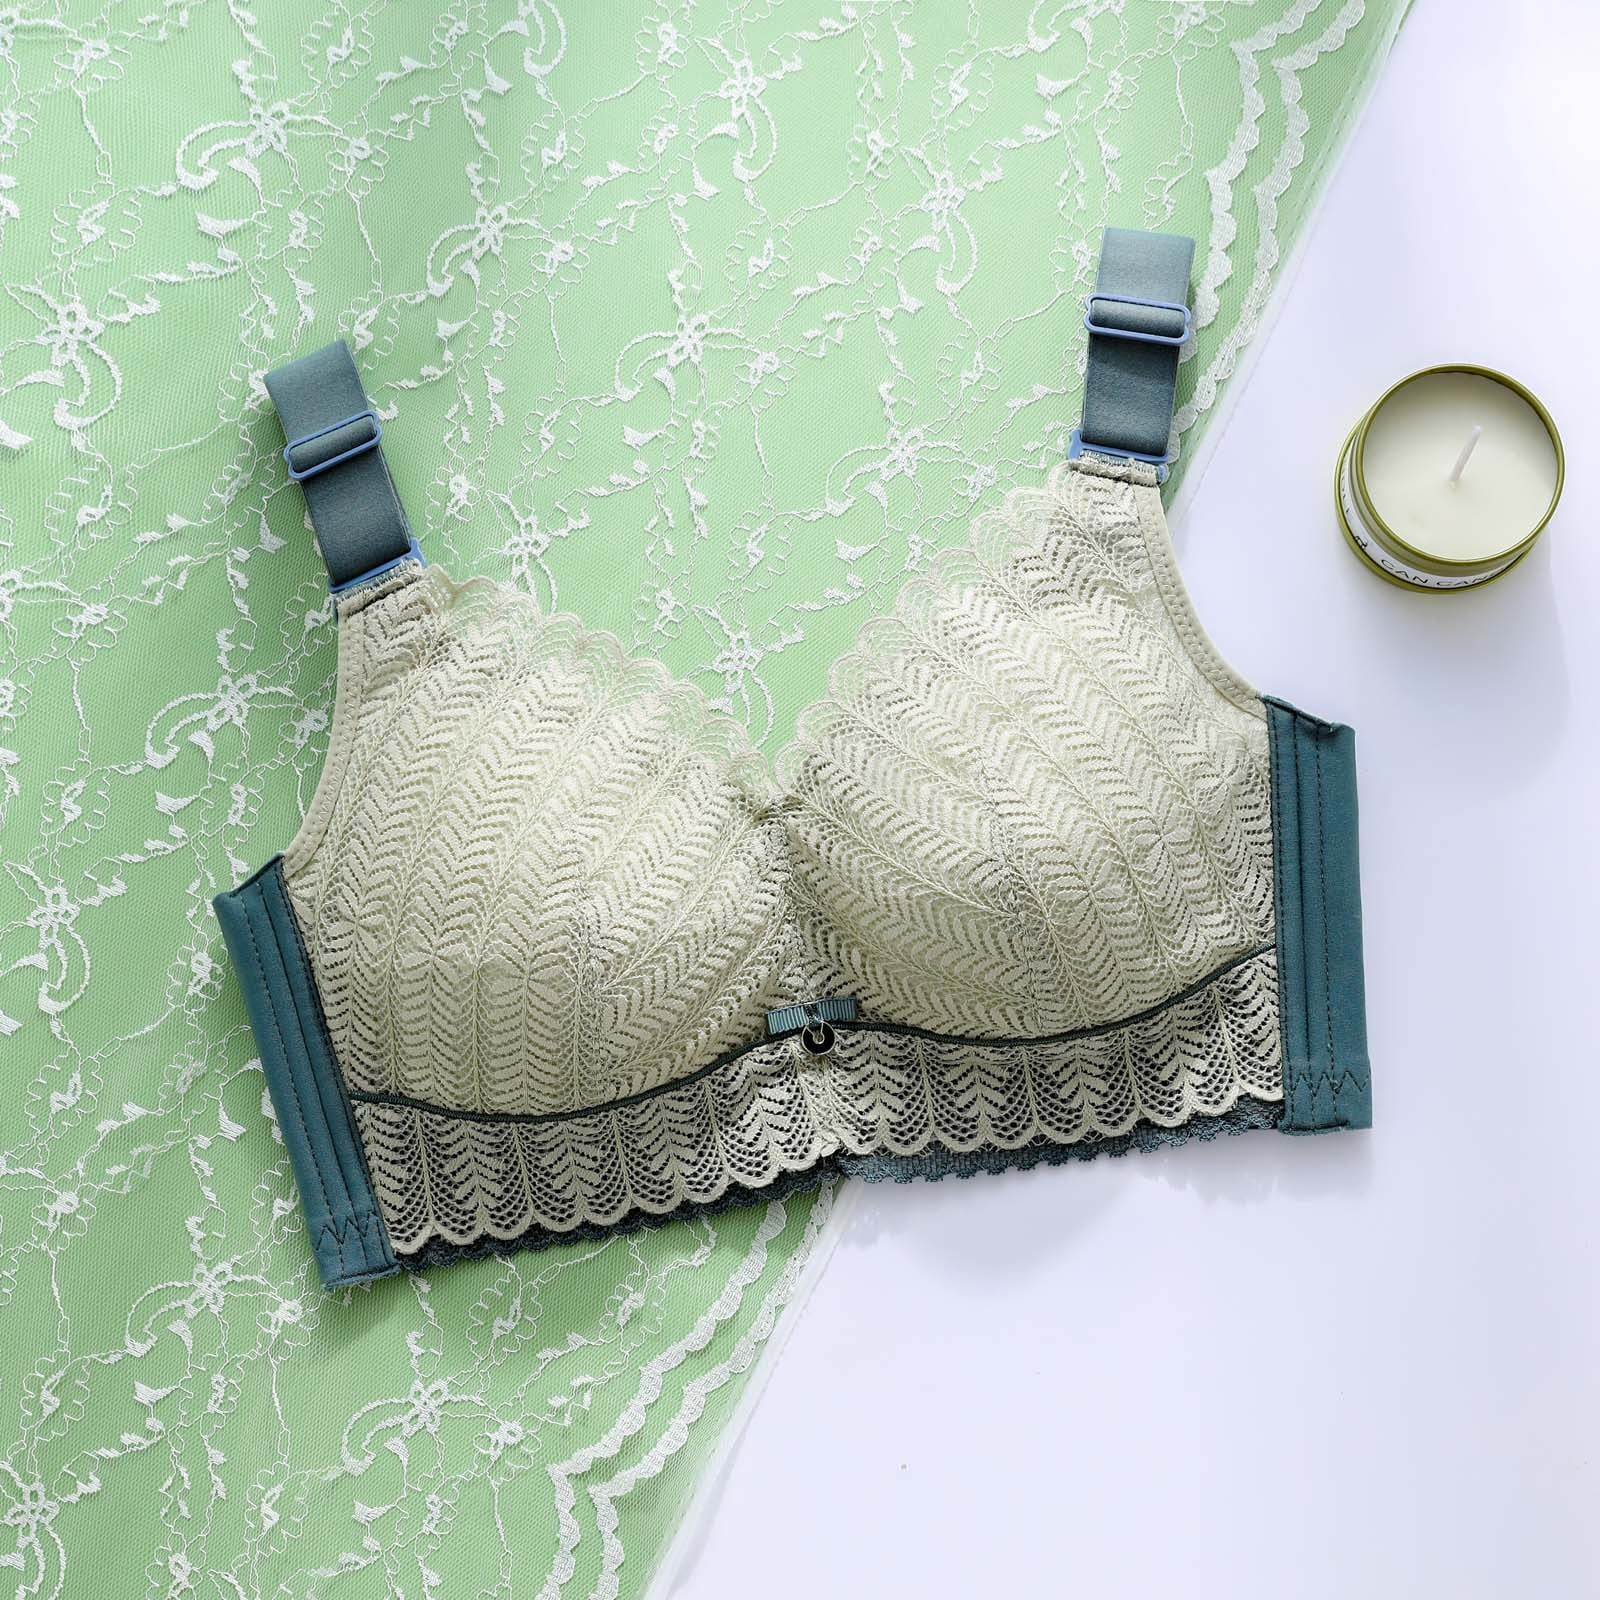 TOWED22 Womens Wireless Bra,Wireless Lightly Lined Cups Wide Straps Full  Coverage Bra Green,34C 